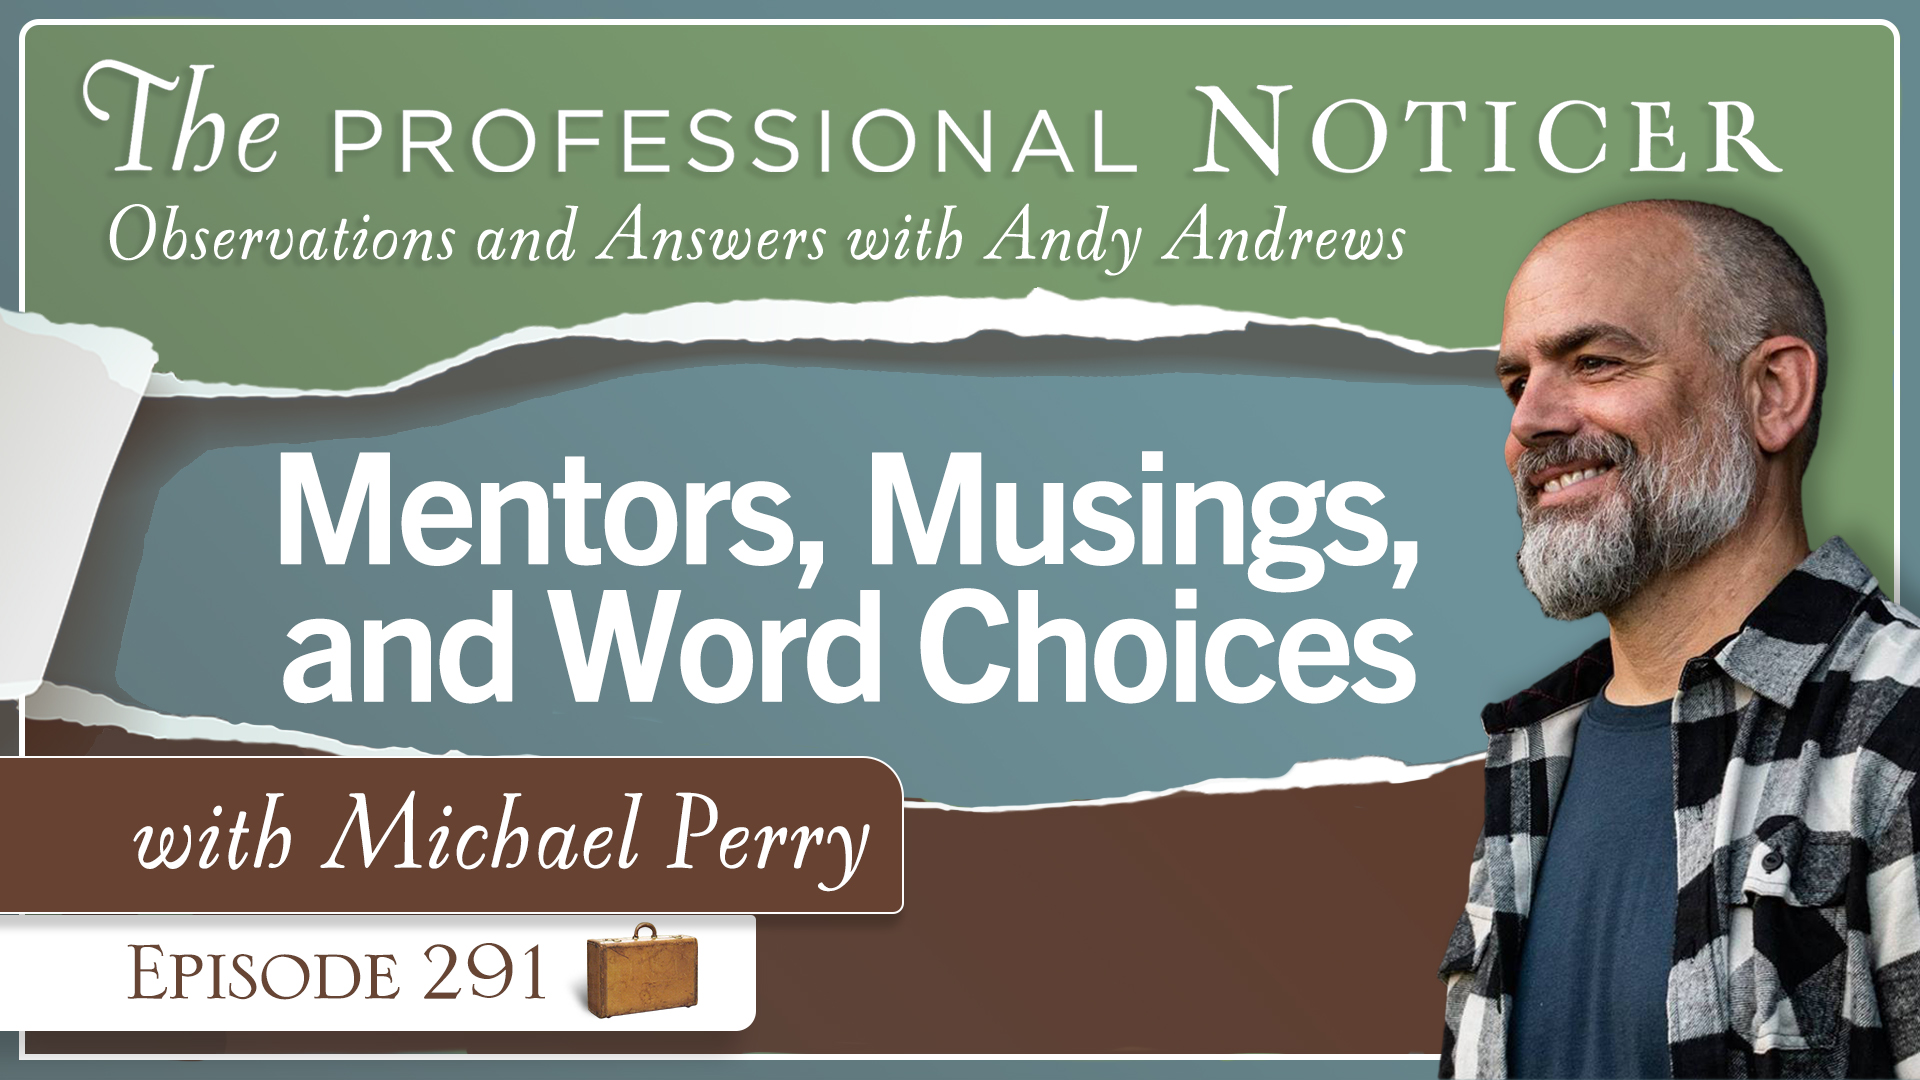 Mentors, Musings, and Word Choices with Michael Perry